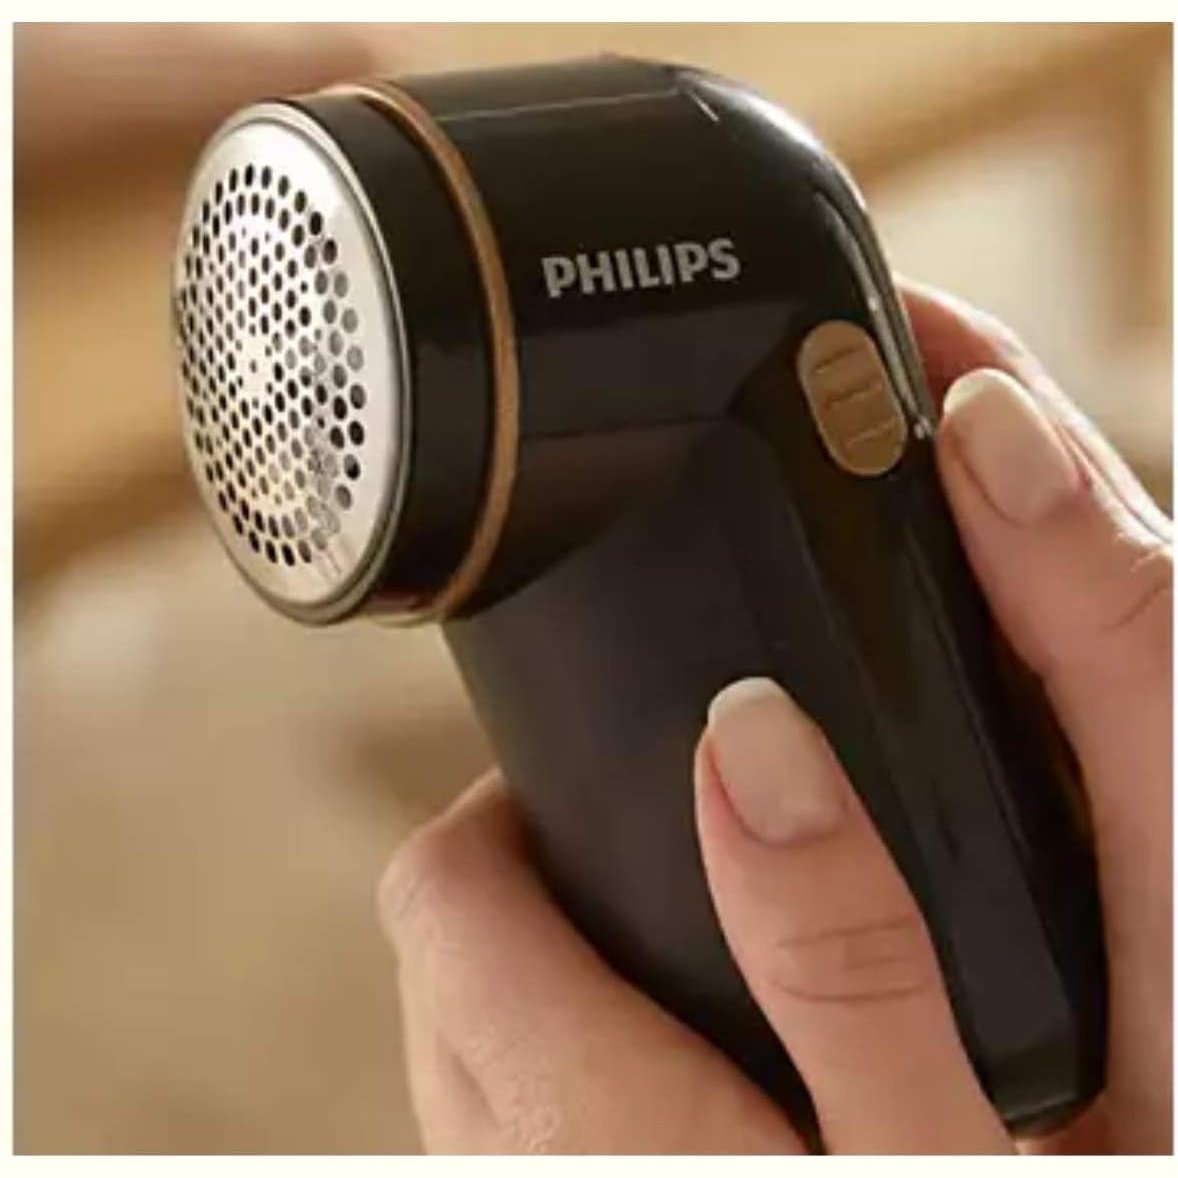 PHILIPS Fabric Shaver, Black, Pack of 1